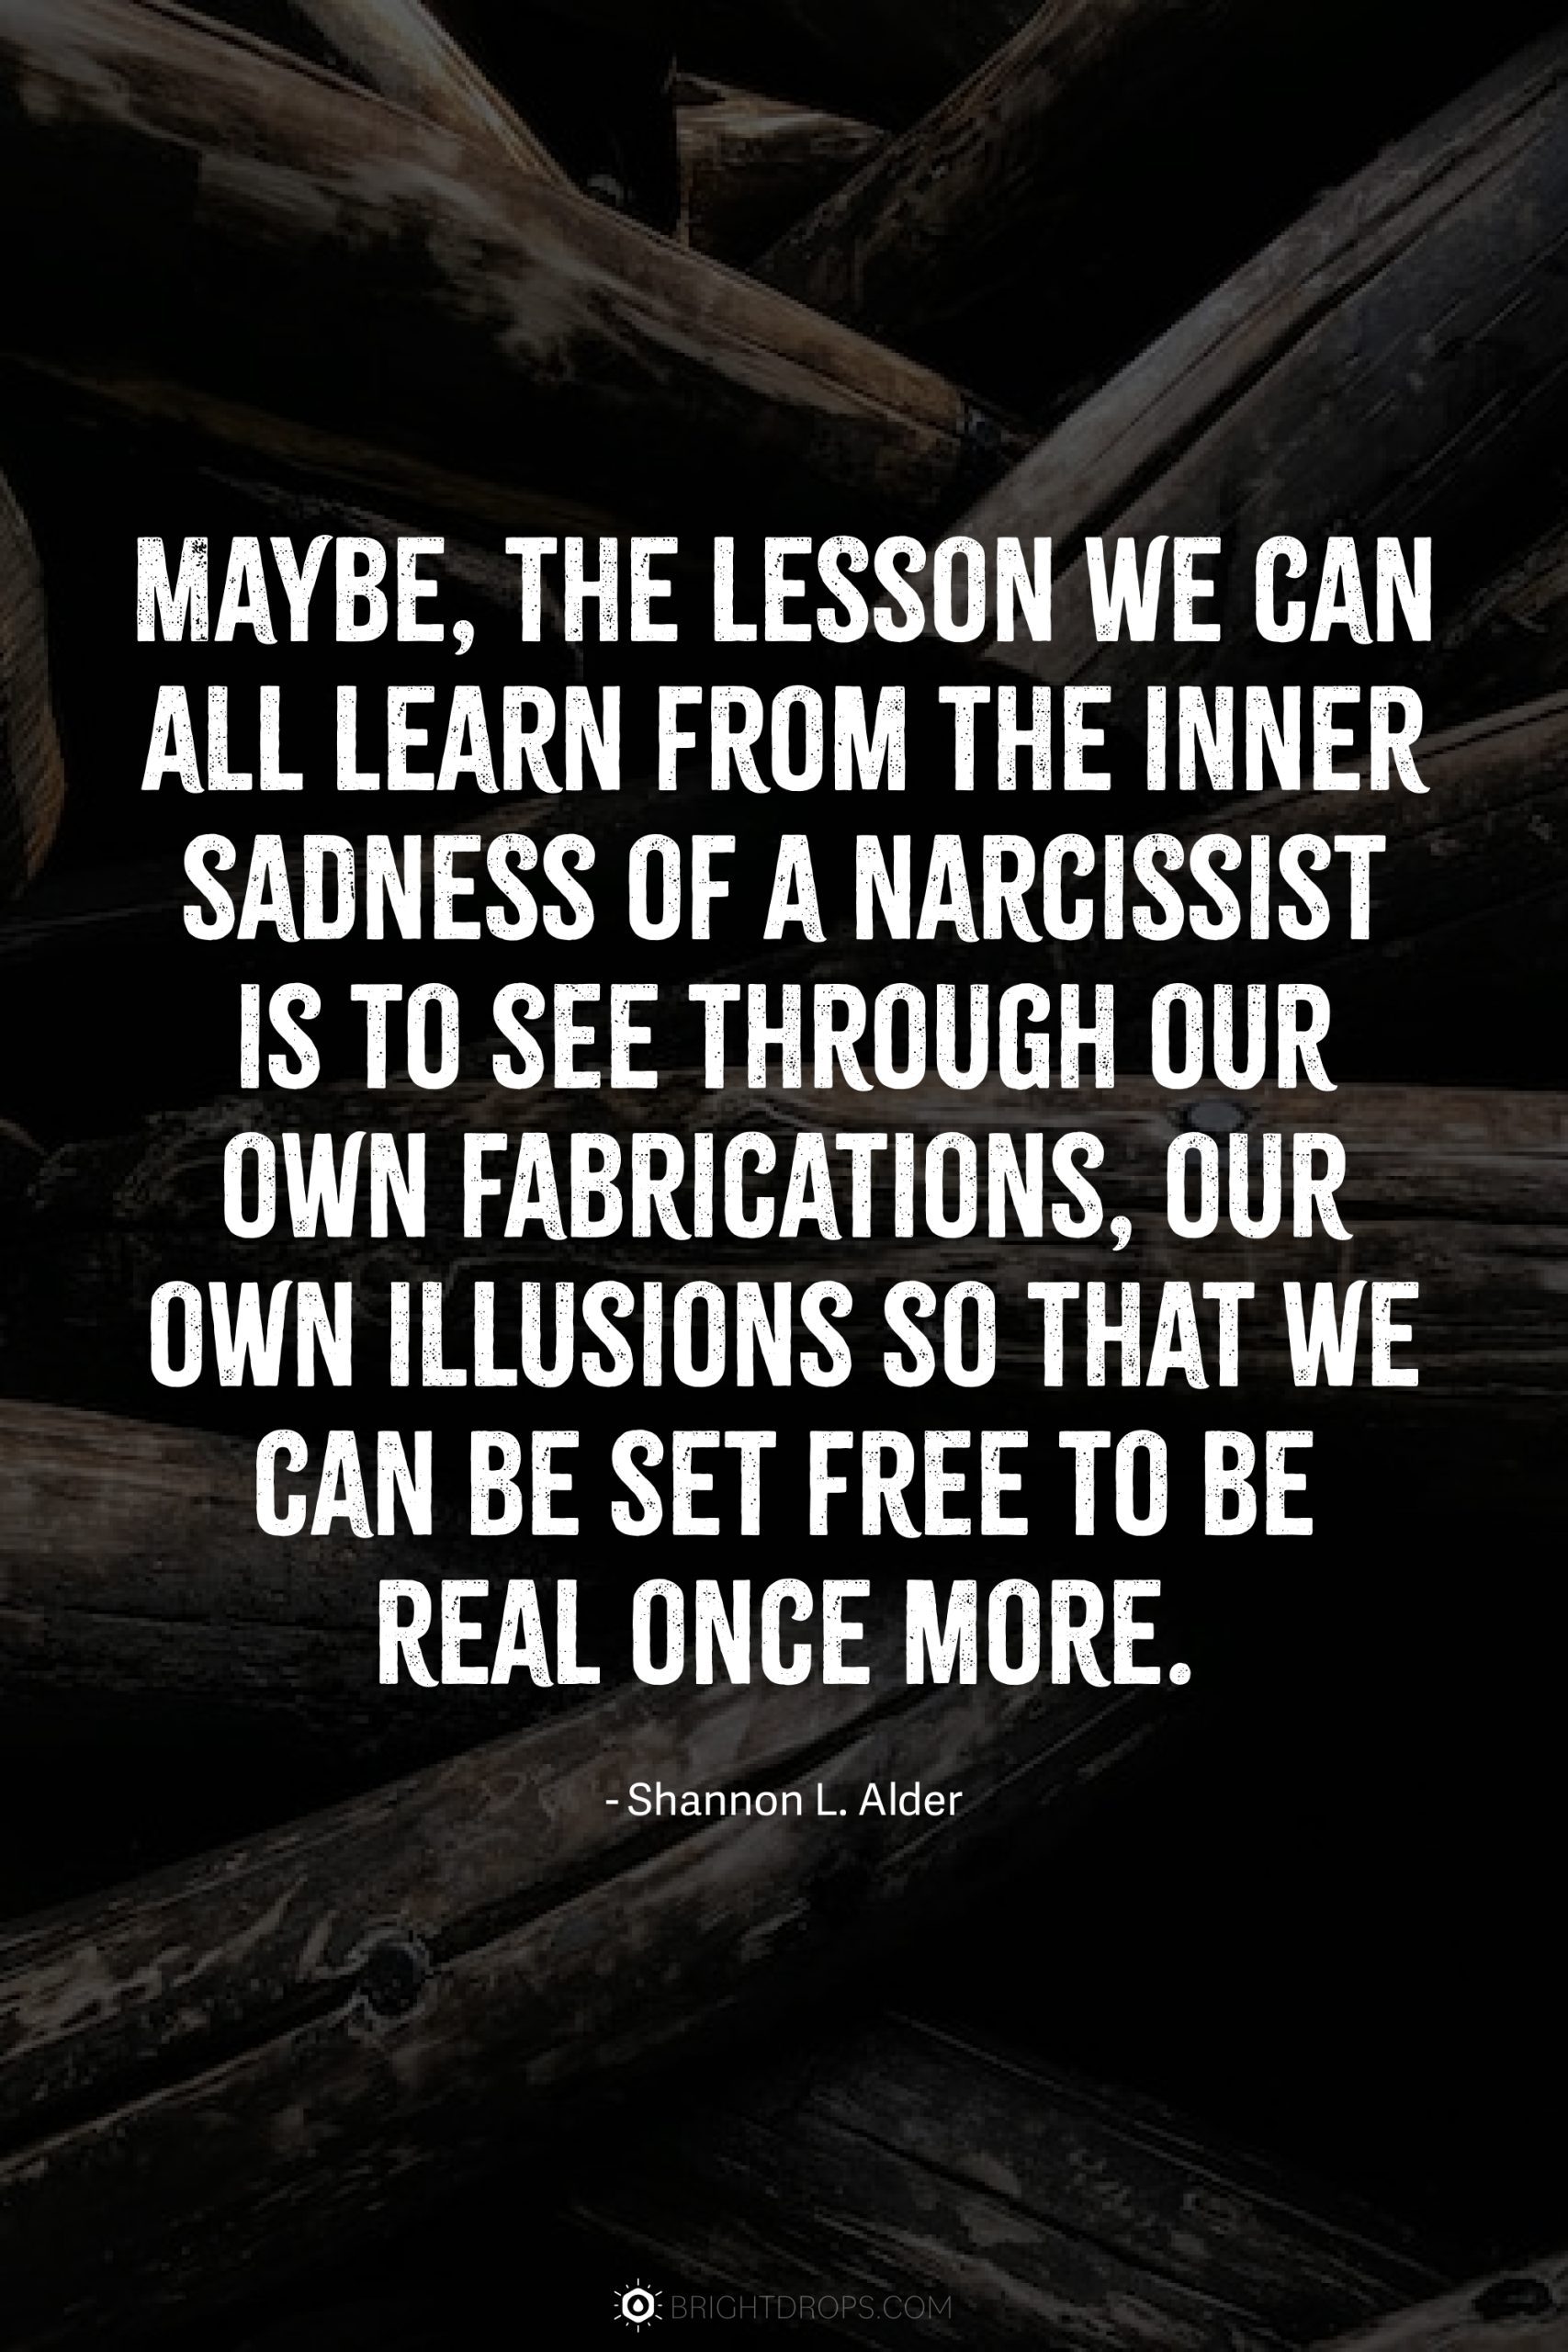 Maybe, the lesson we can all learn from the inner sadness of a narcissist is to see through our own fabrications, our own illusions so that we can be set free to be real once more.